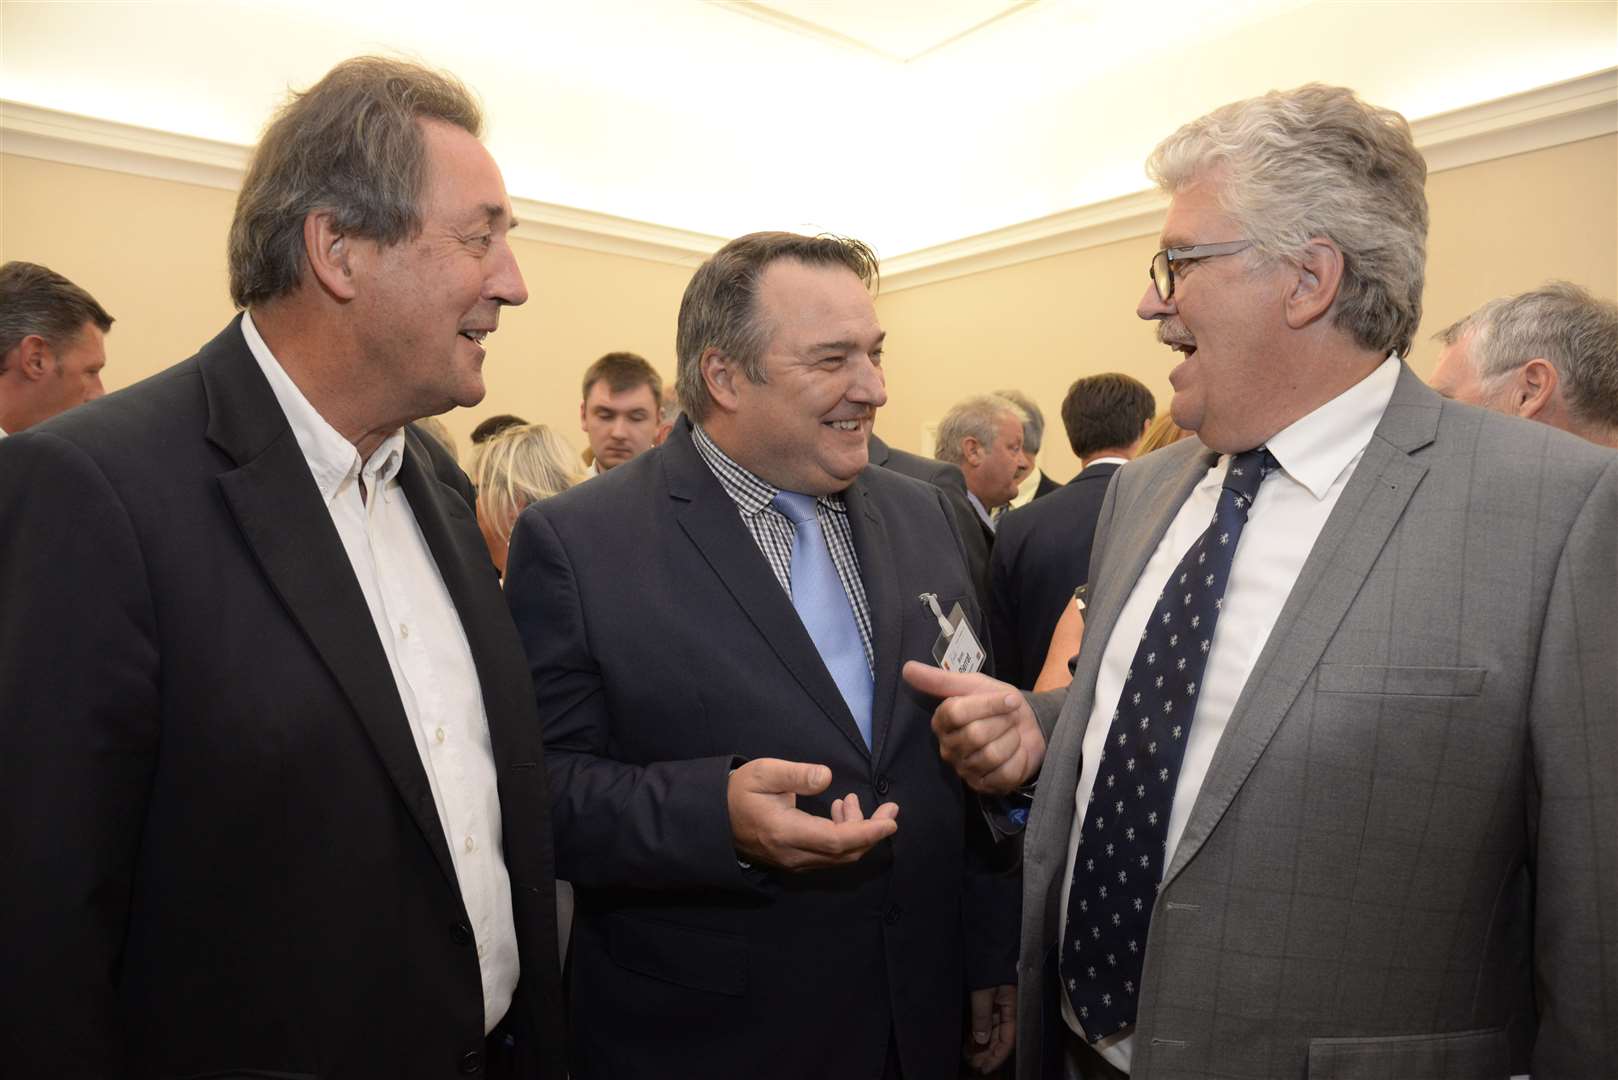 Cllr Mark Dance, right, talks with French delegates at a reception for Kent businesses in Ashford in 2016. Picture: Chris Davey